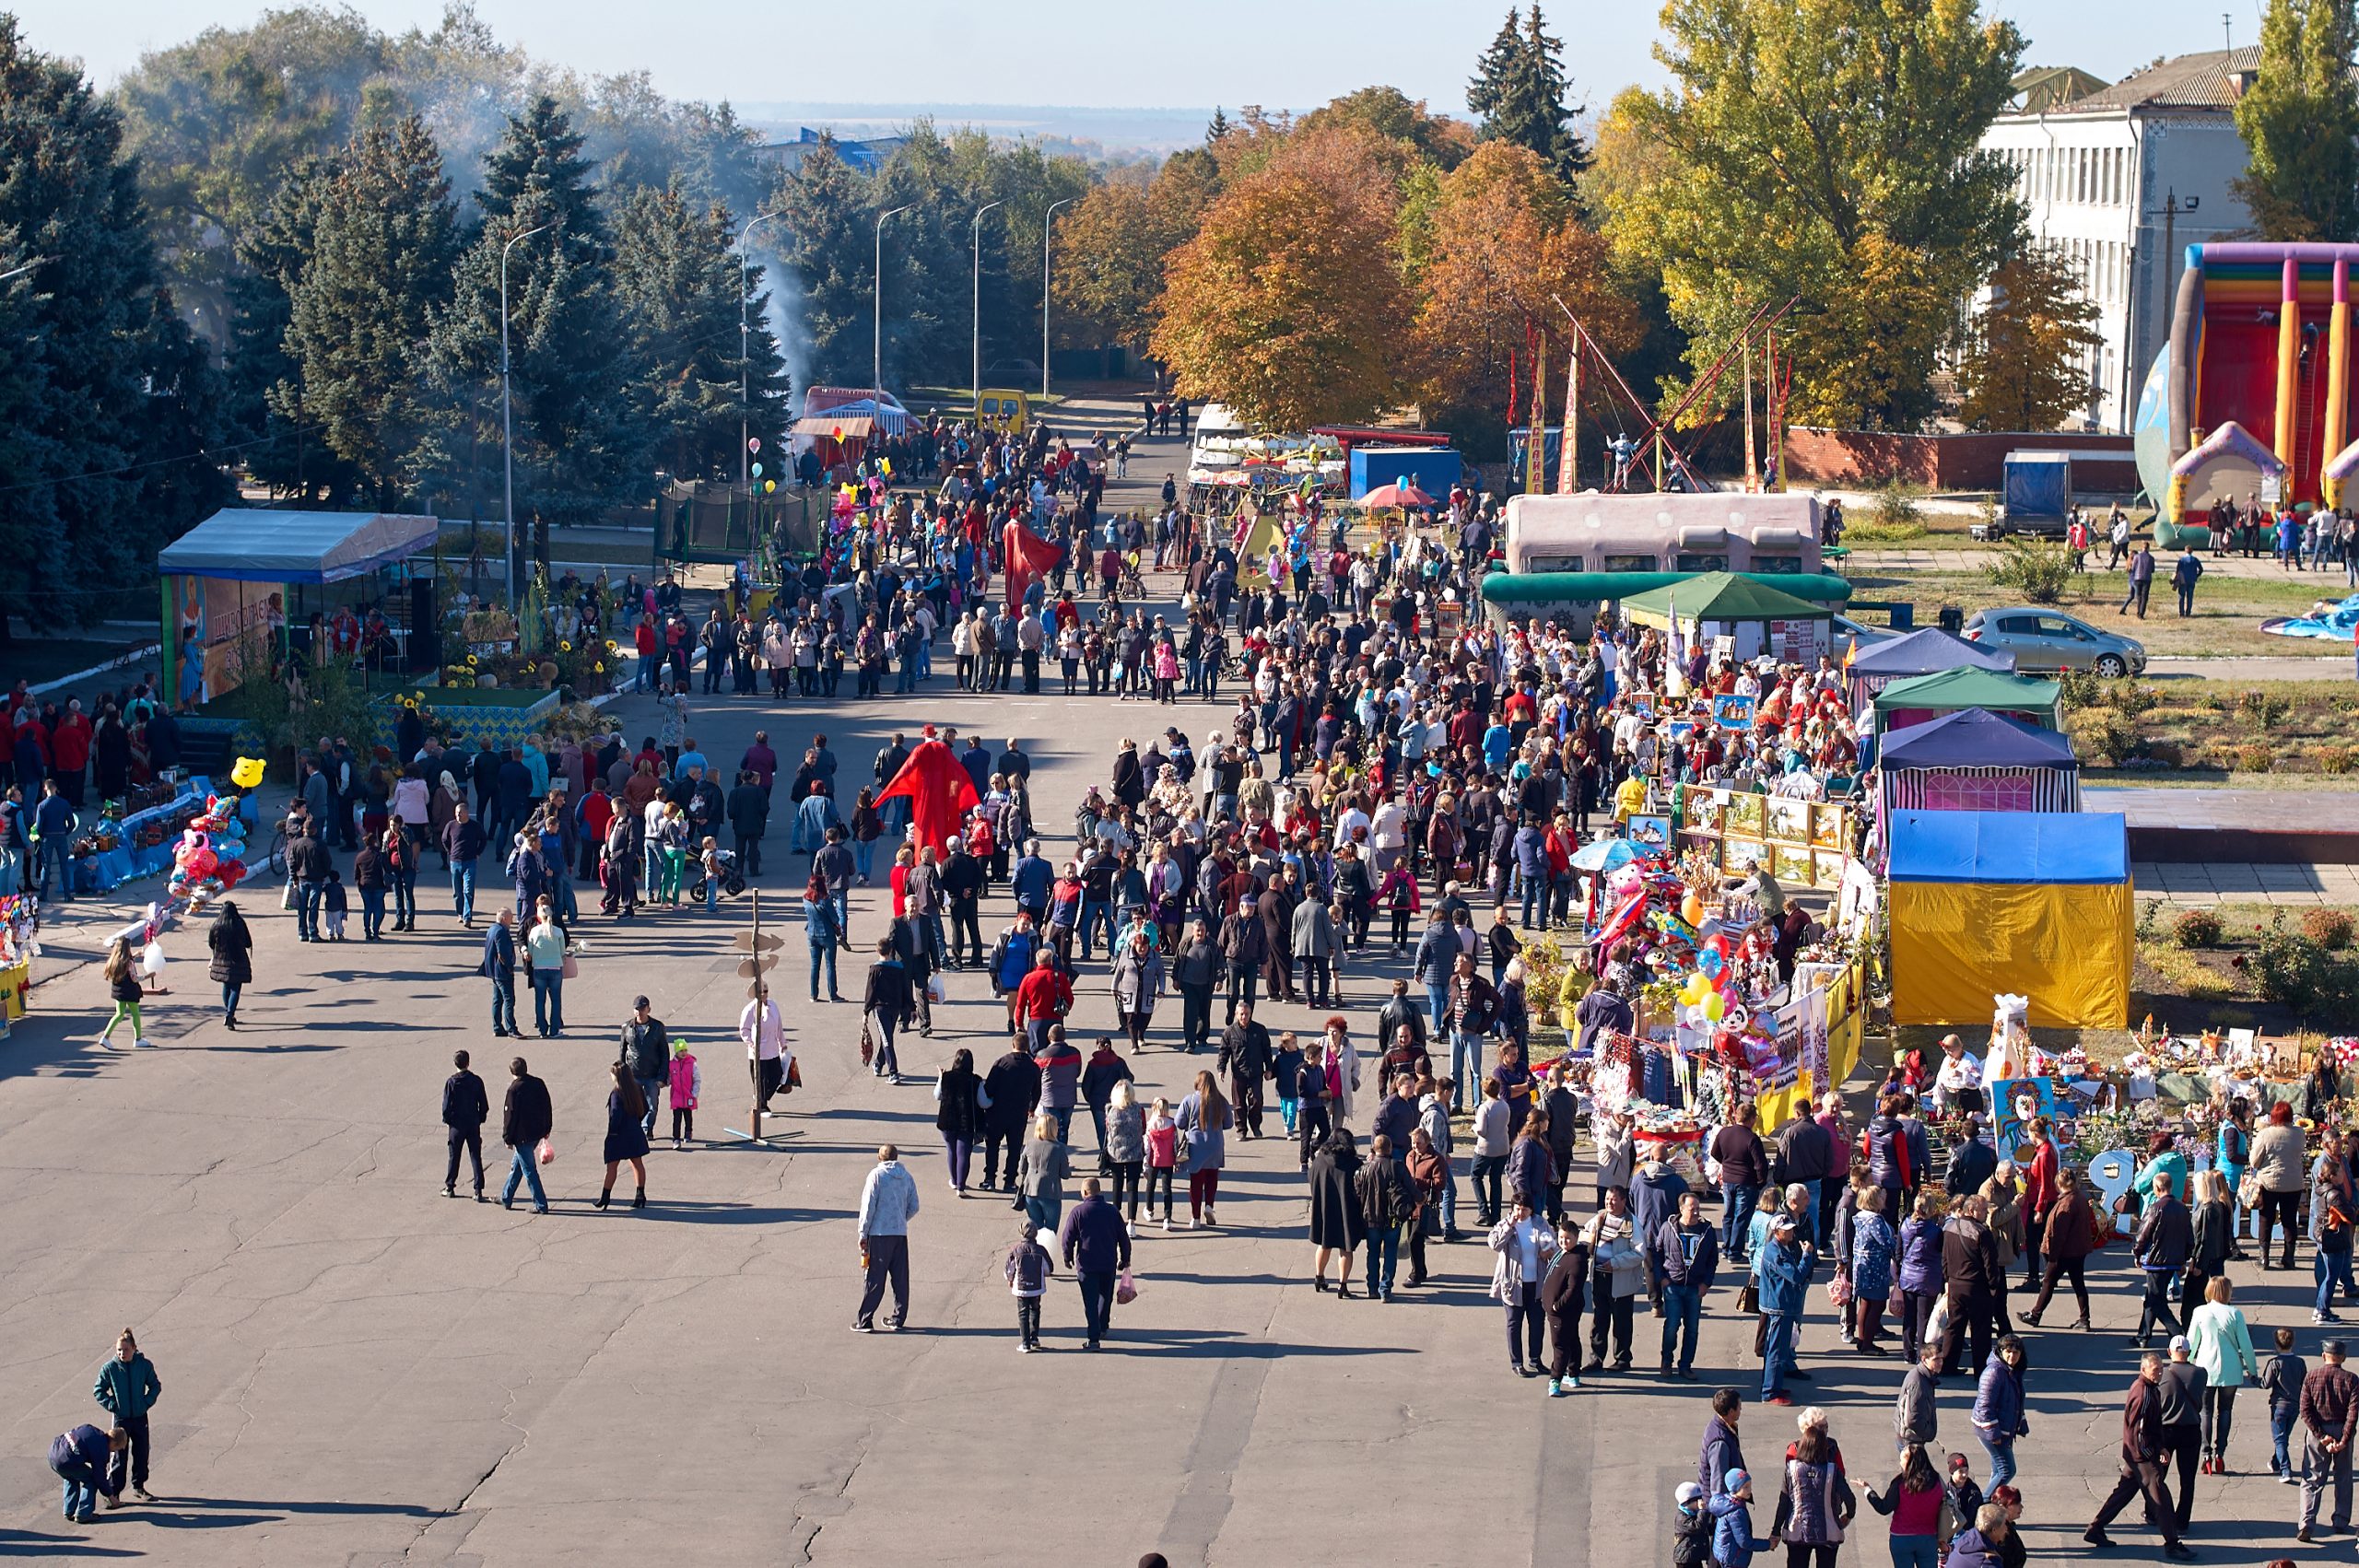 The Day of Pokrovske settlement (a traditional autumn Intercession fair)